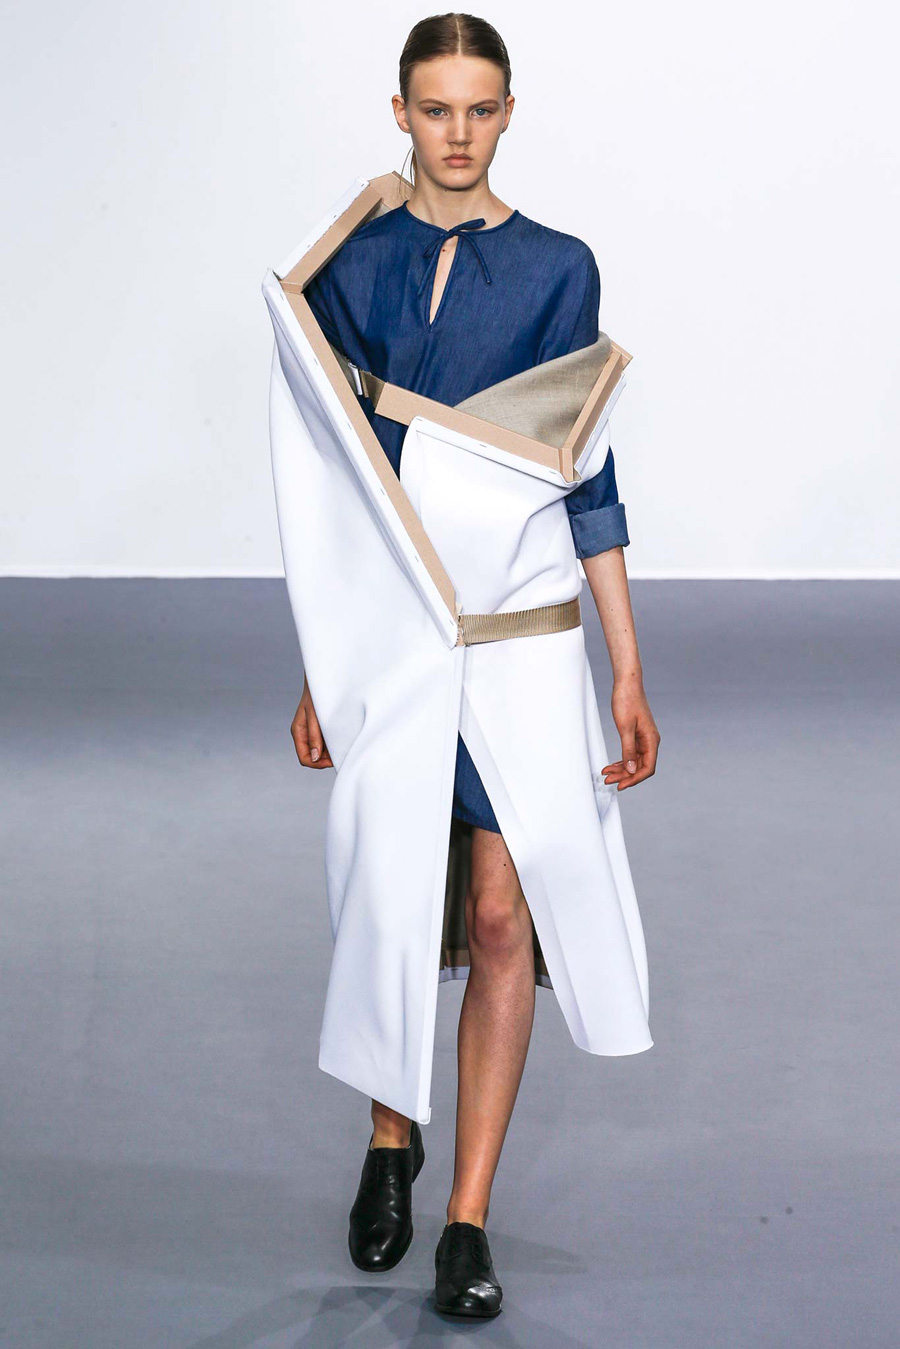 wearable object in fashion one more good one viktor rolf show 2015 canvas dress